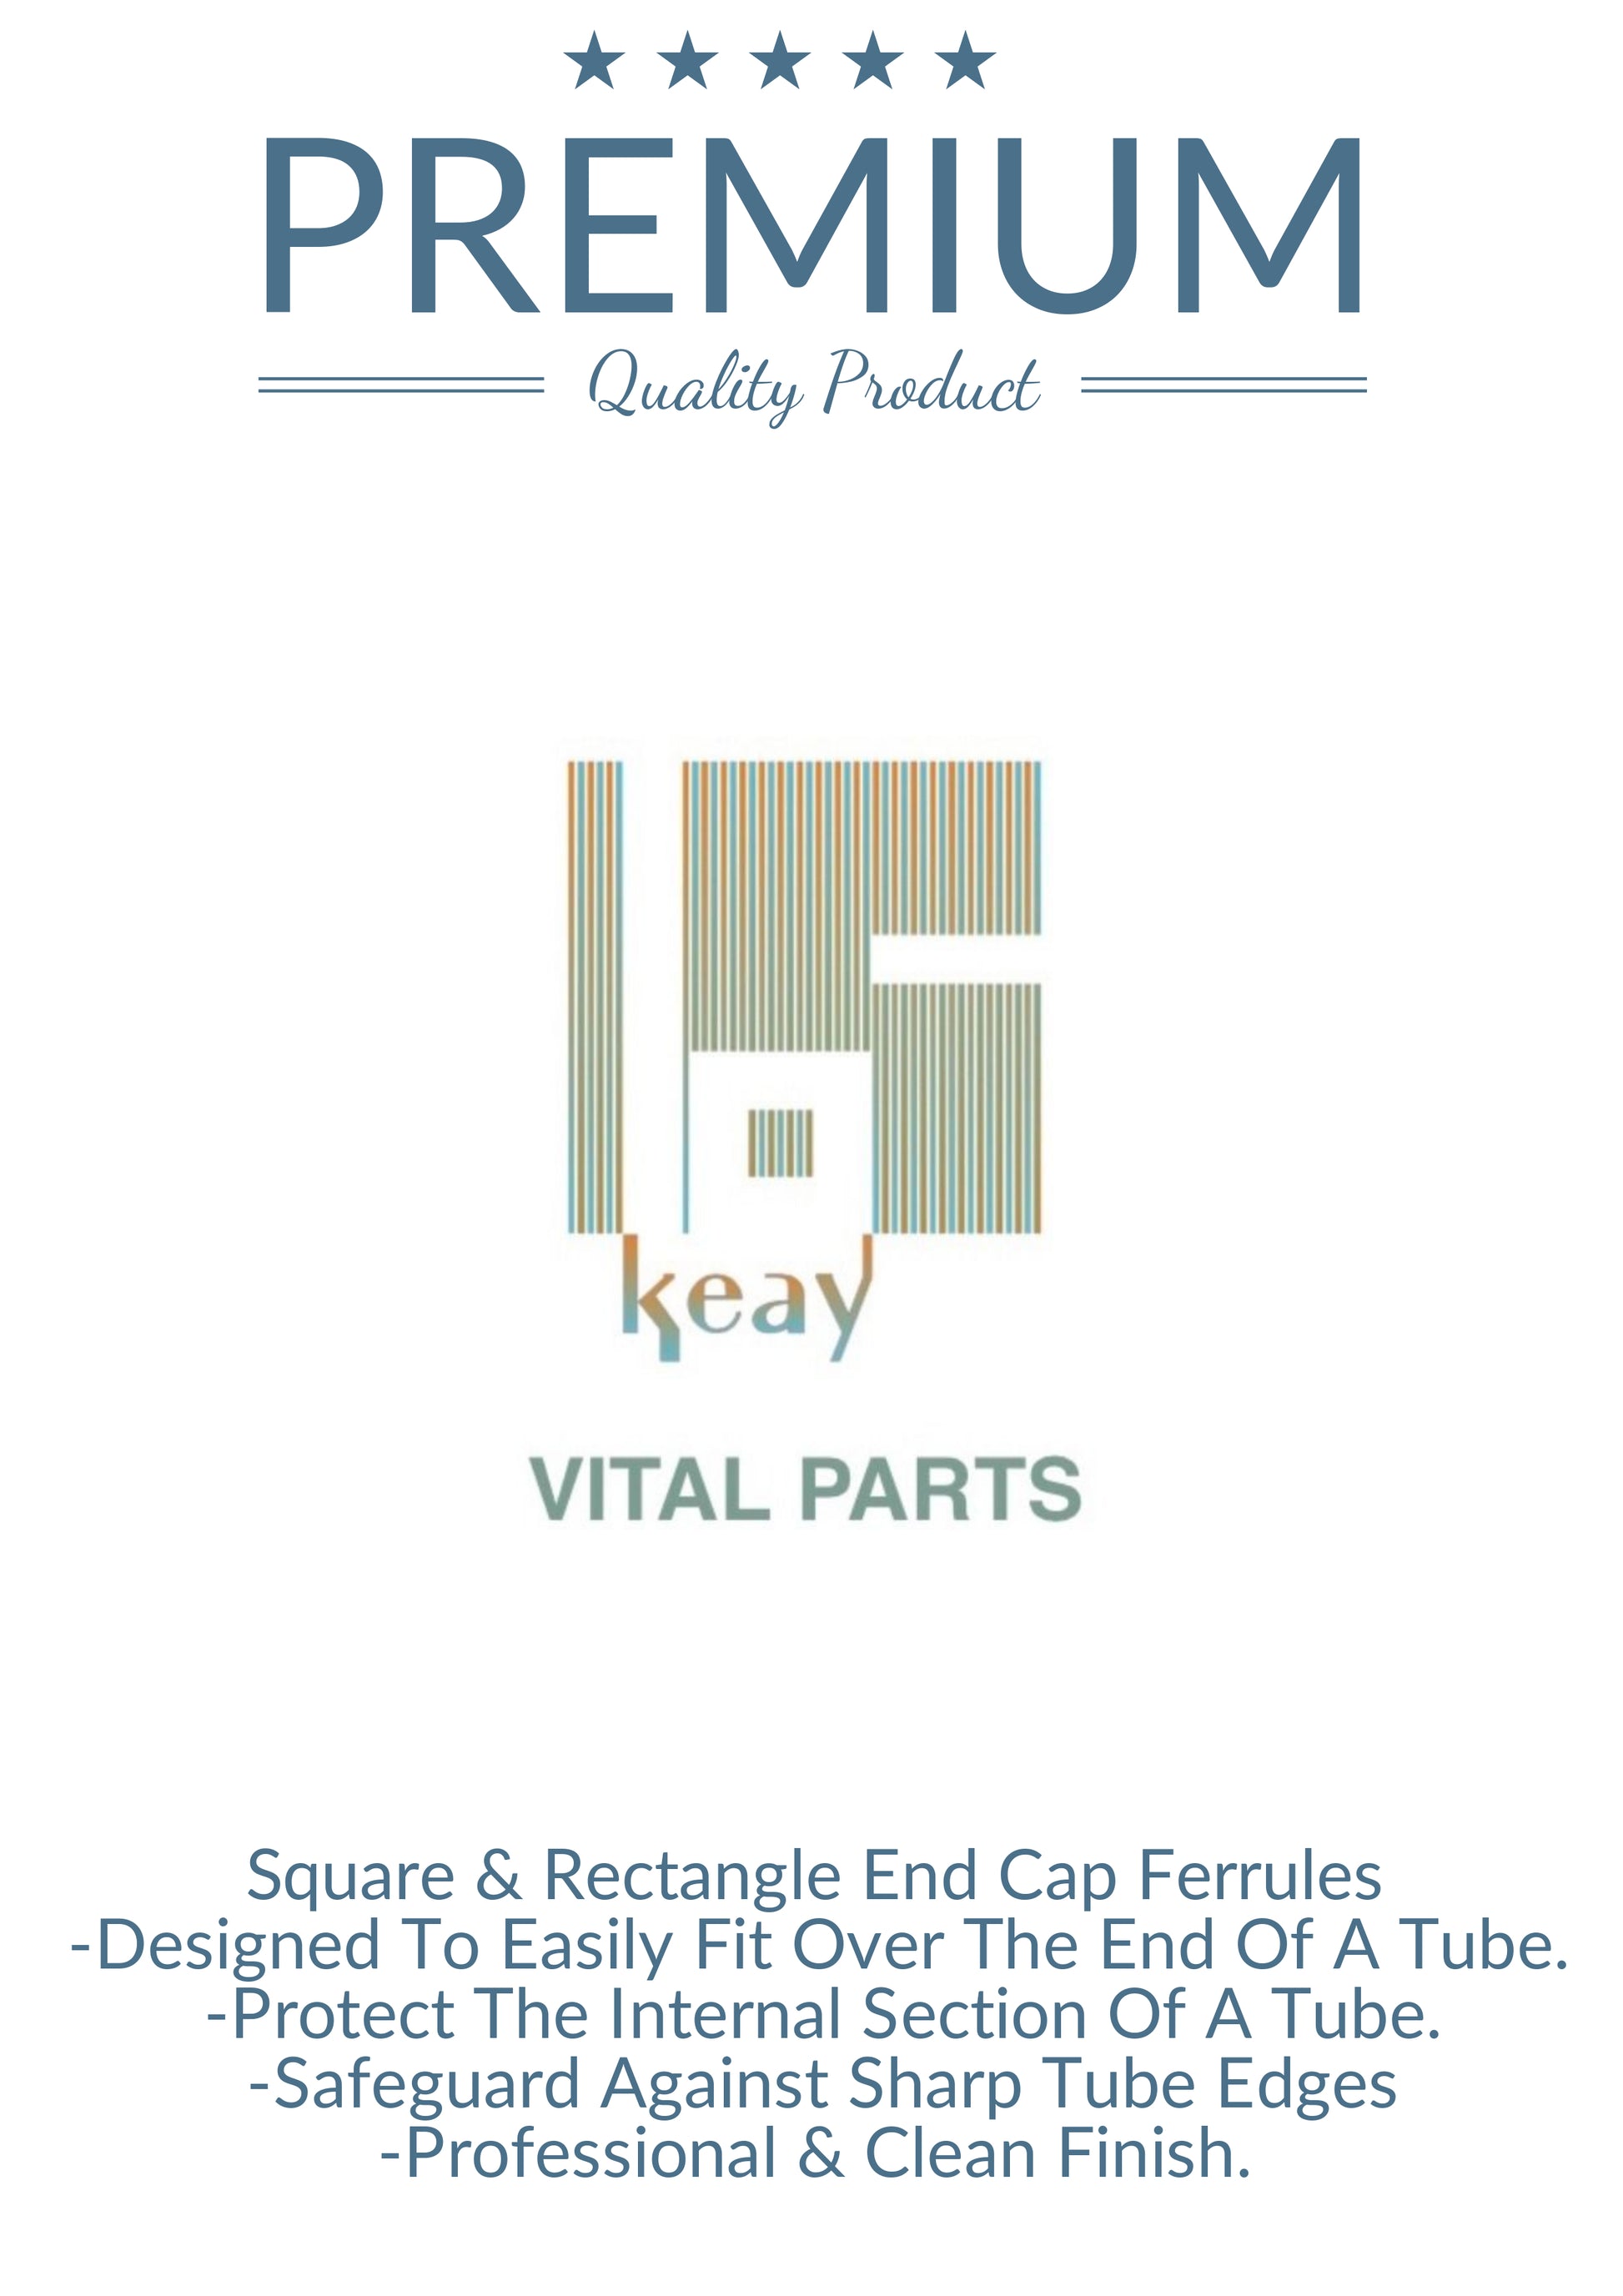 40x20mm Rectangle Plastic Ferrules End Caps for Tubes Pipes Made in Germany - Keay Vital Parts